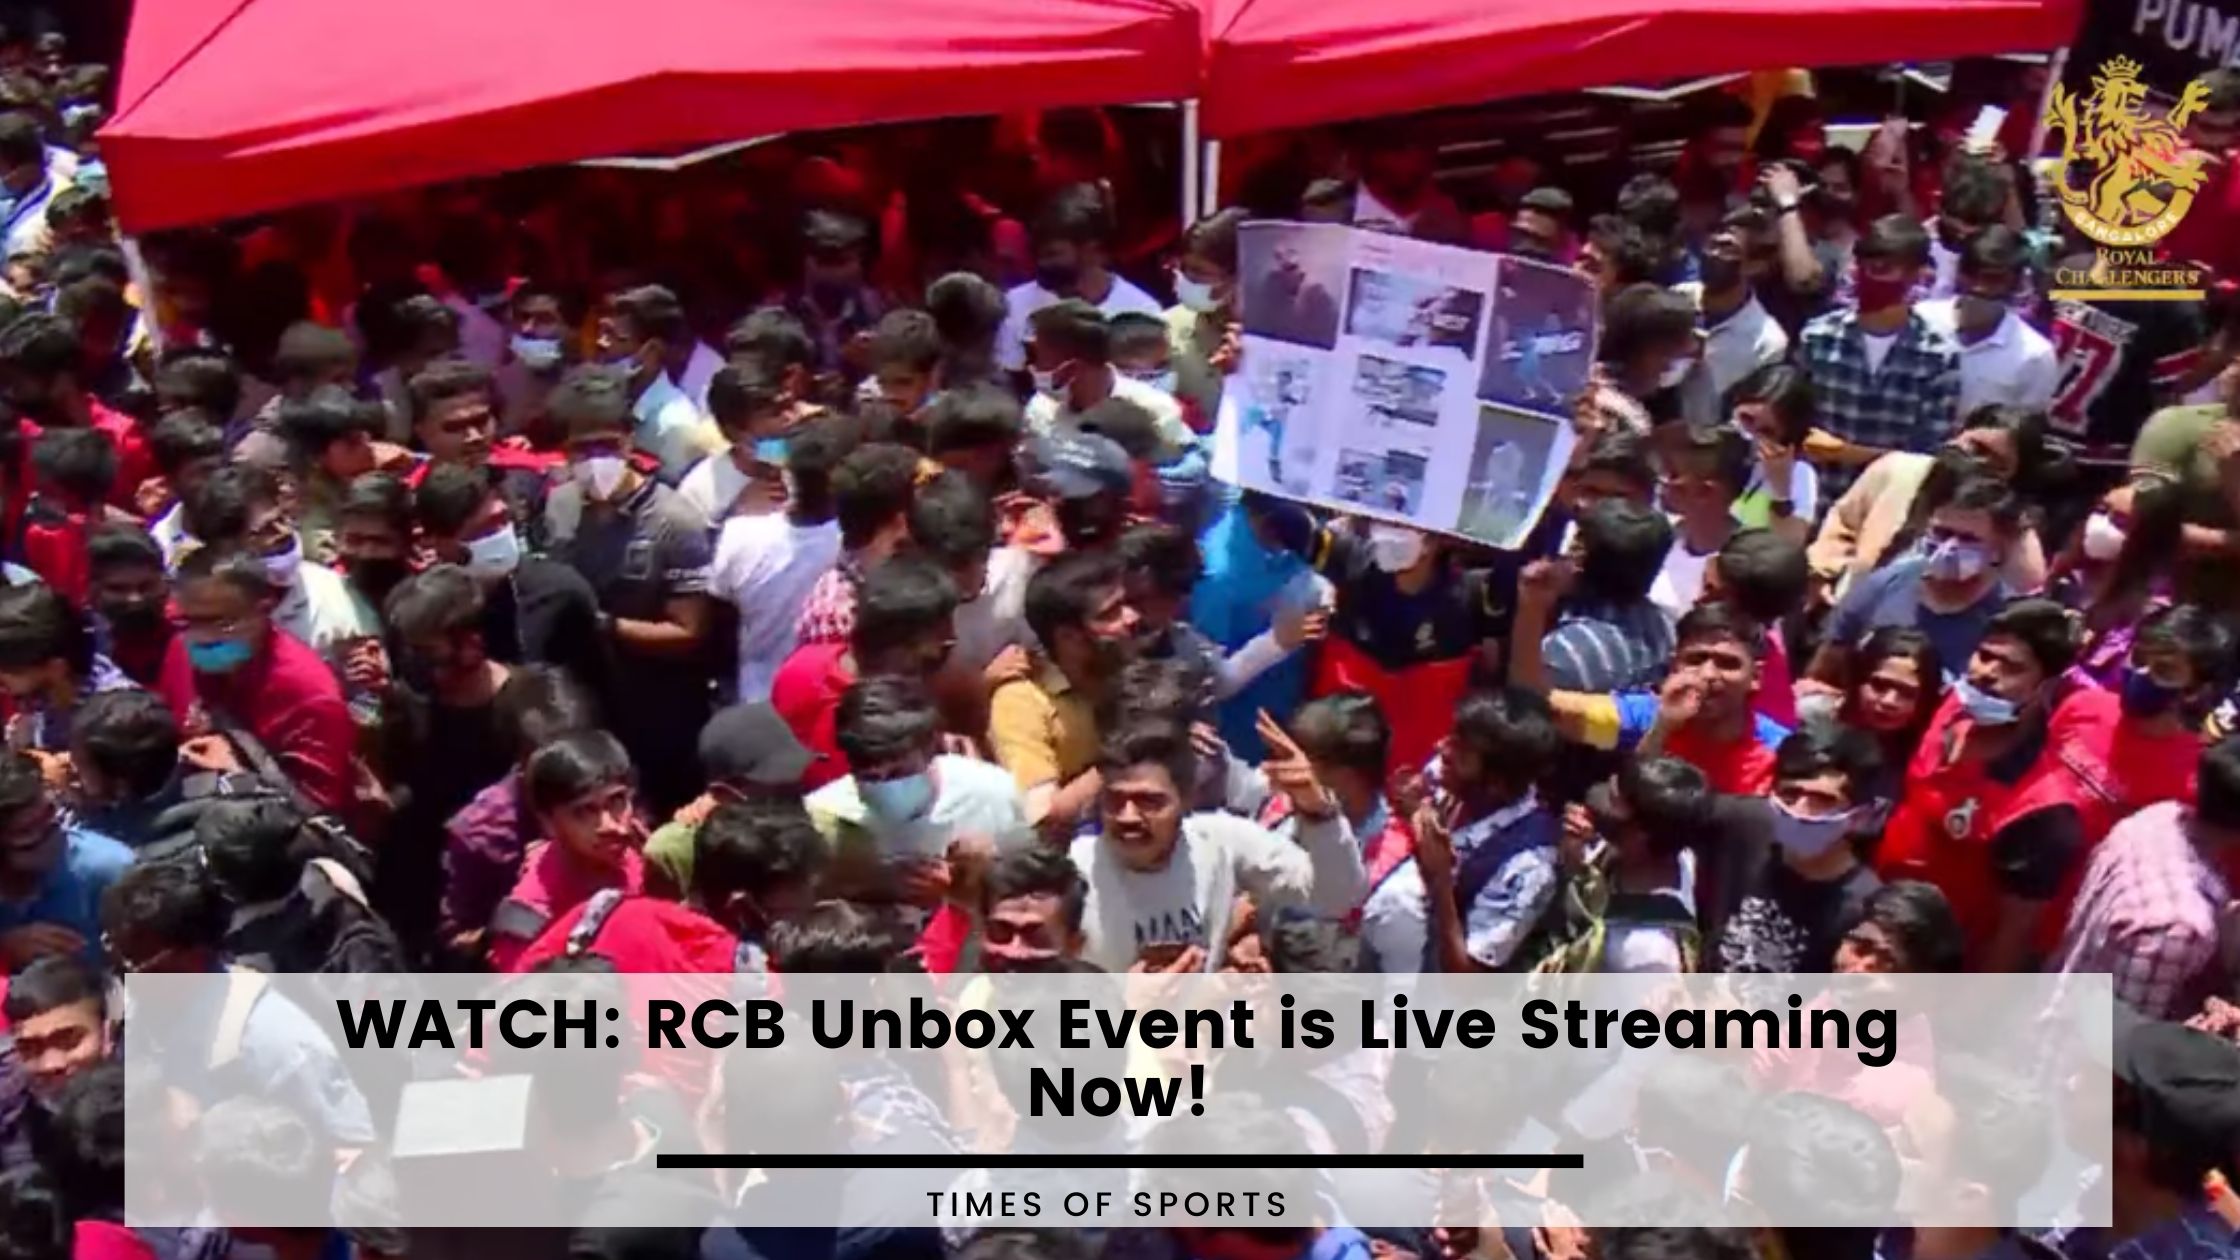 WATCH RCB Unbox Event is Live Streaming Now!